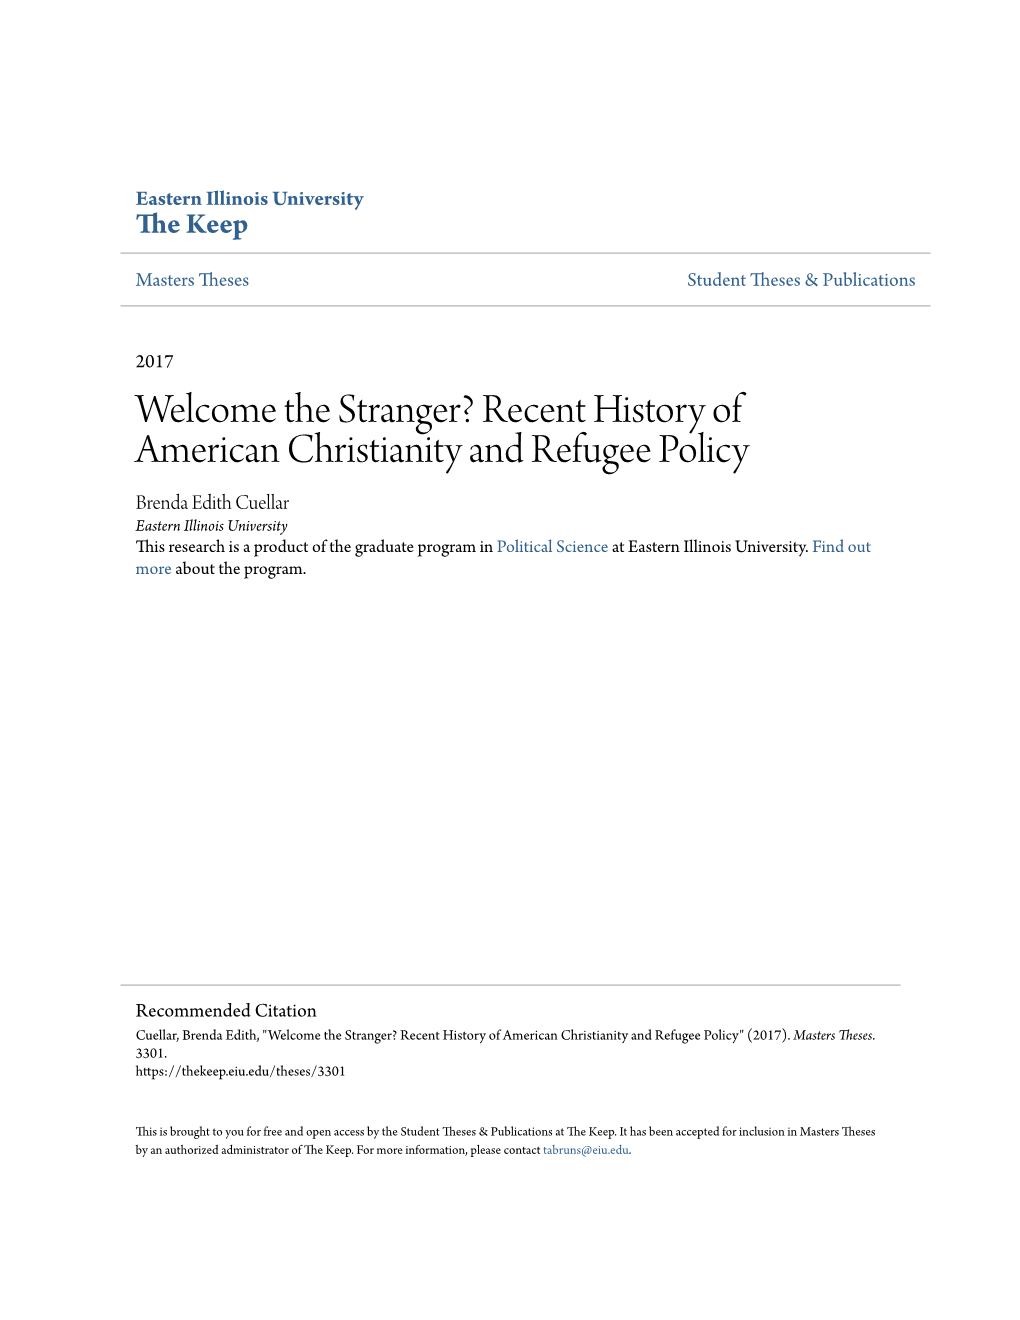 The Stranger? Recent History of American Christianity and Refugee